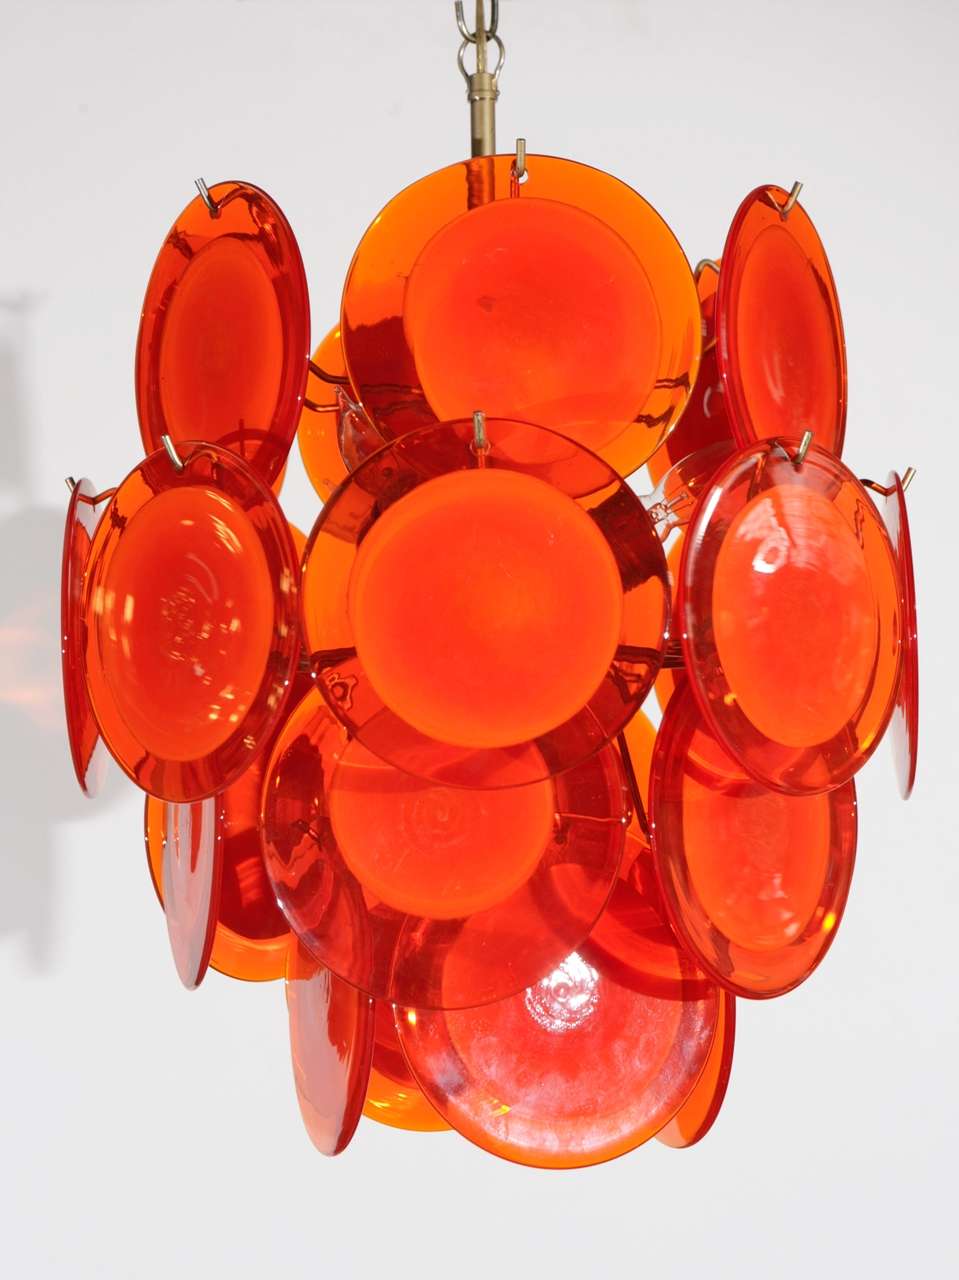 Four tiers of orange handblown glass discs on a gold tone fixture.